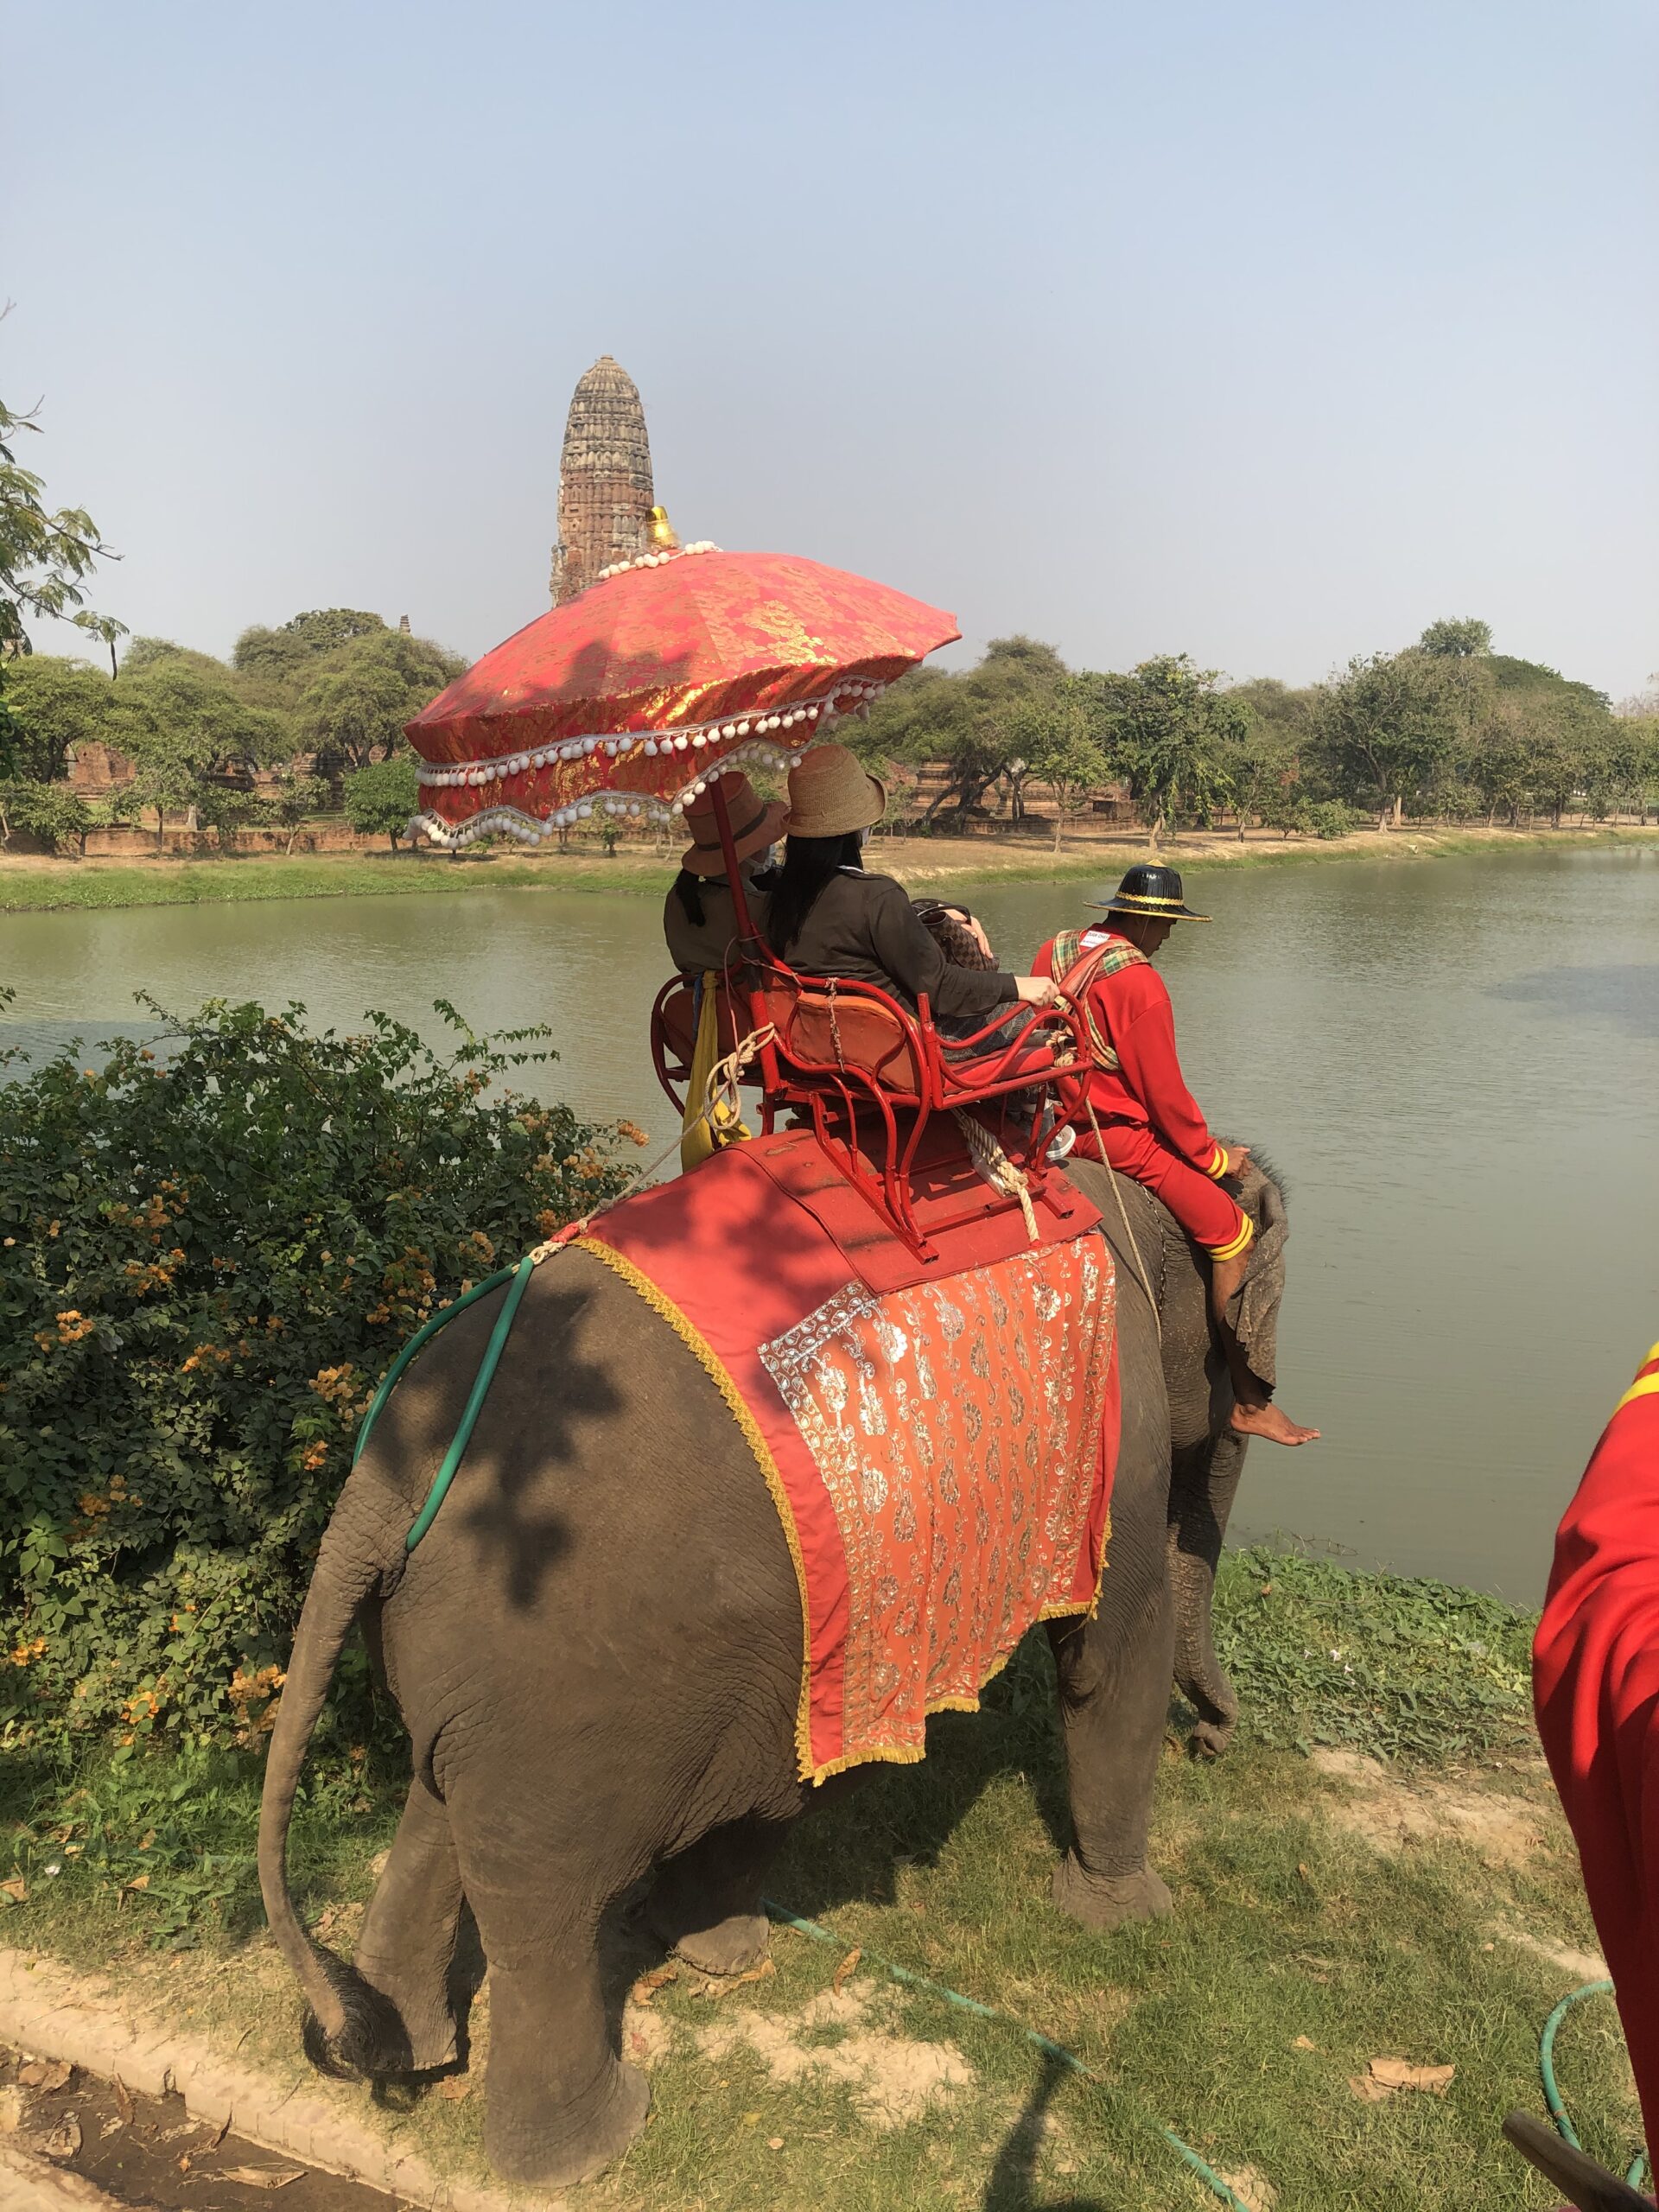 Elephant ride for tourists in the ancient city of Ayutthaya.